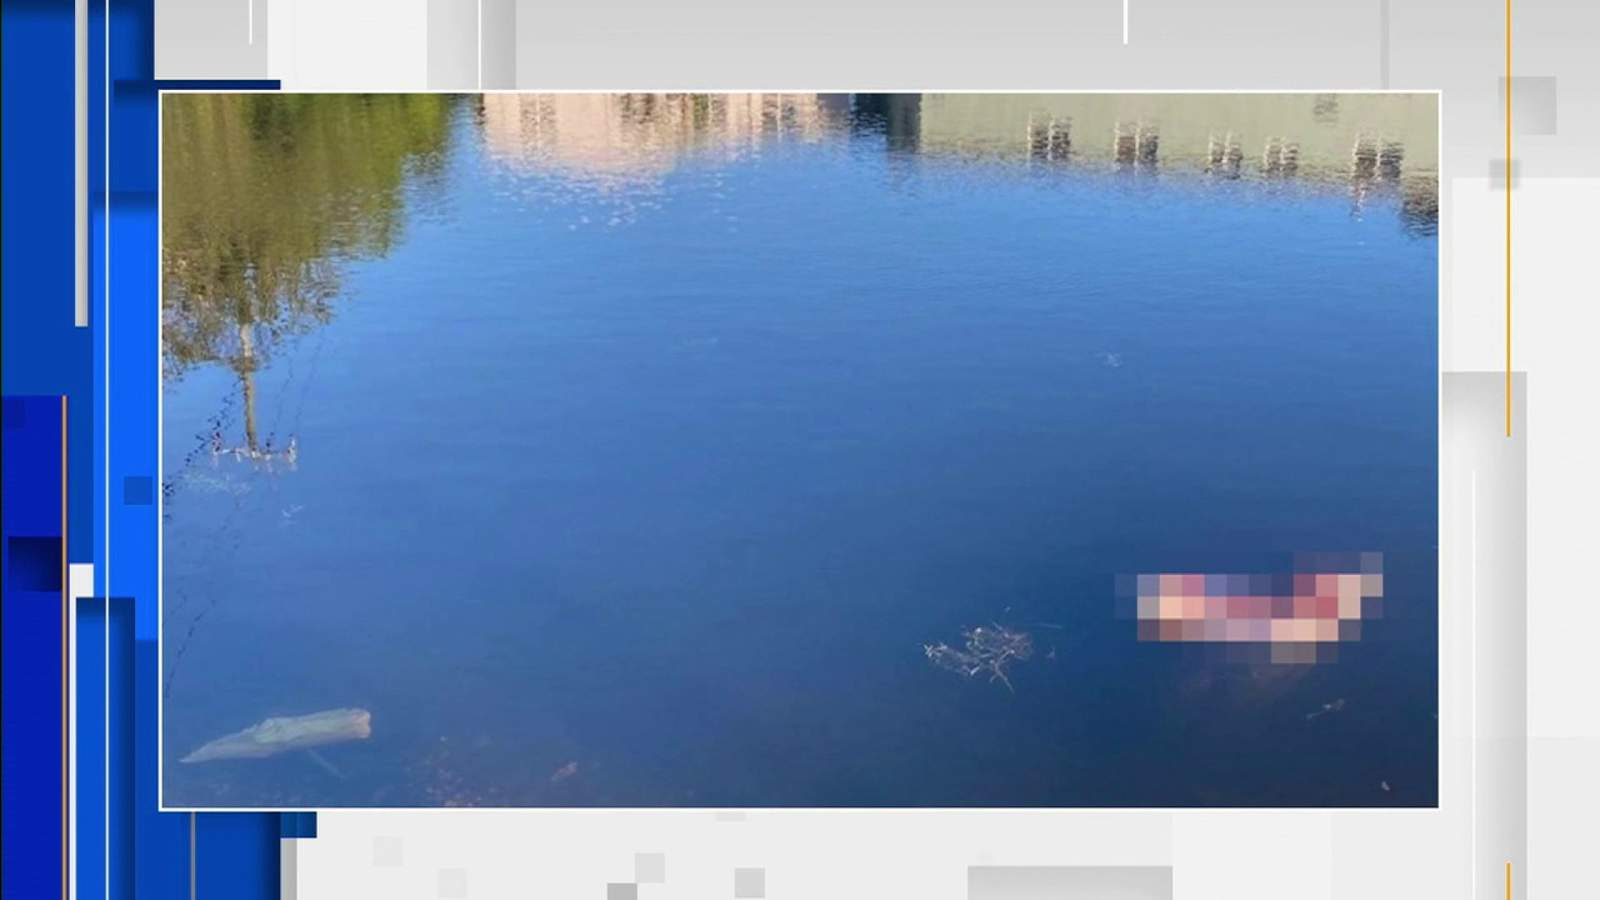 Manatee found dead, with disturbing scene leading to questions about how it died and what killed it